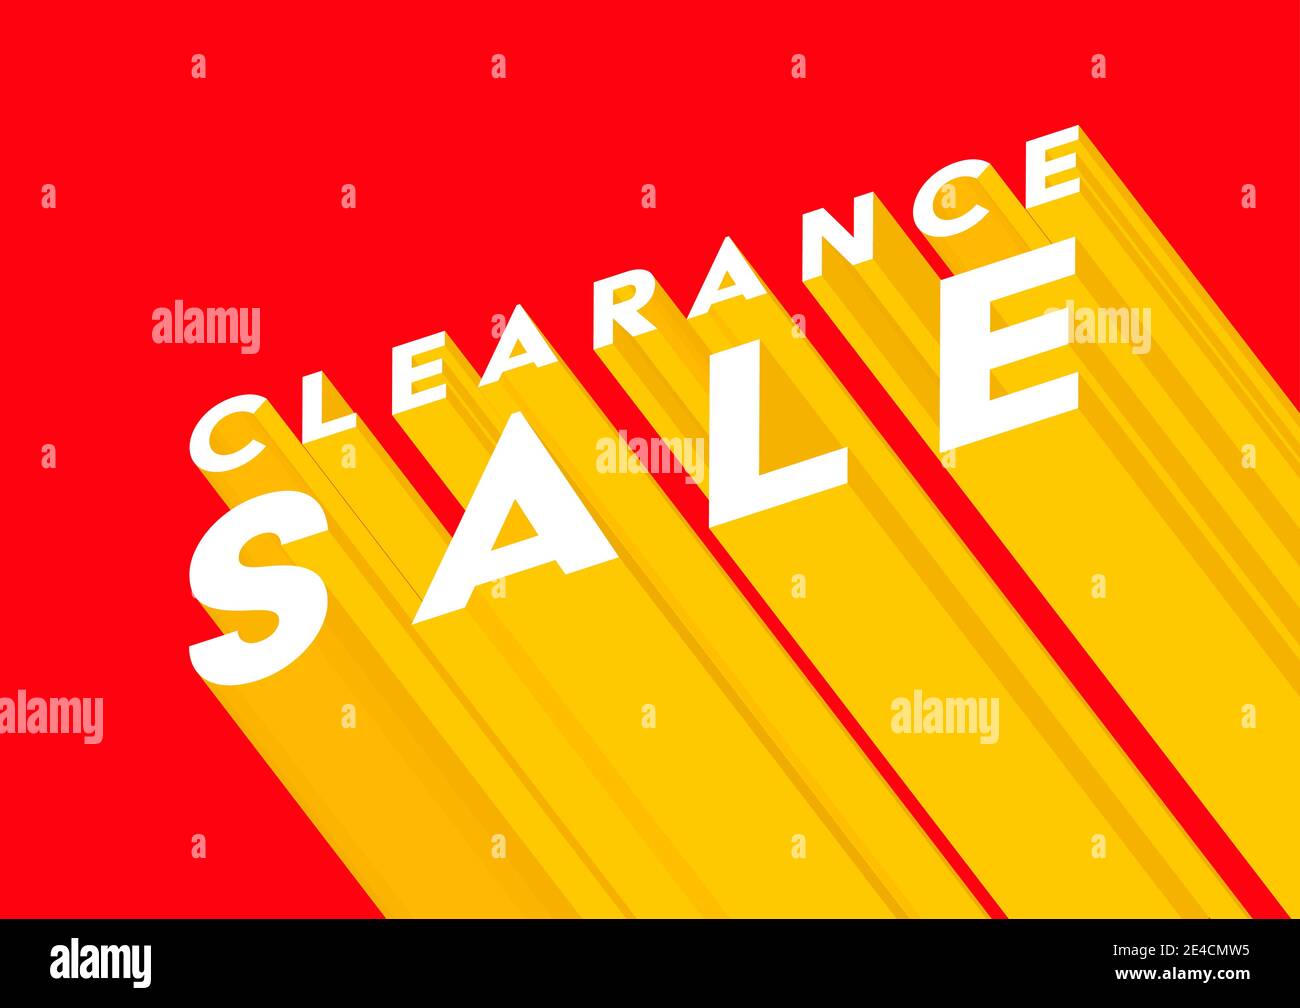 Online clearance bargains